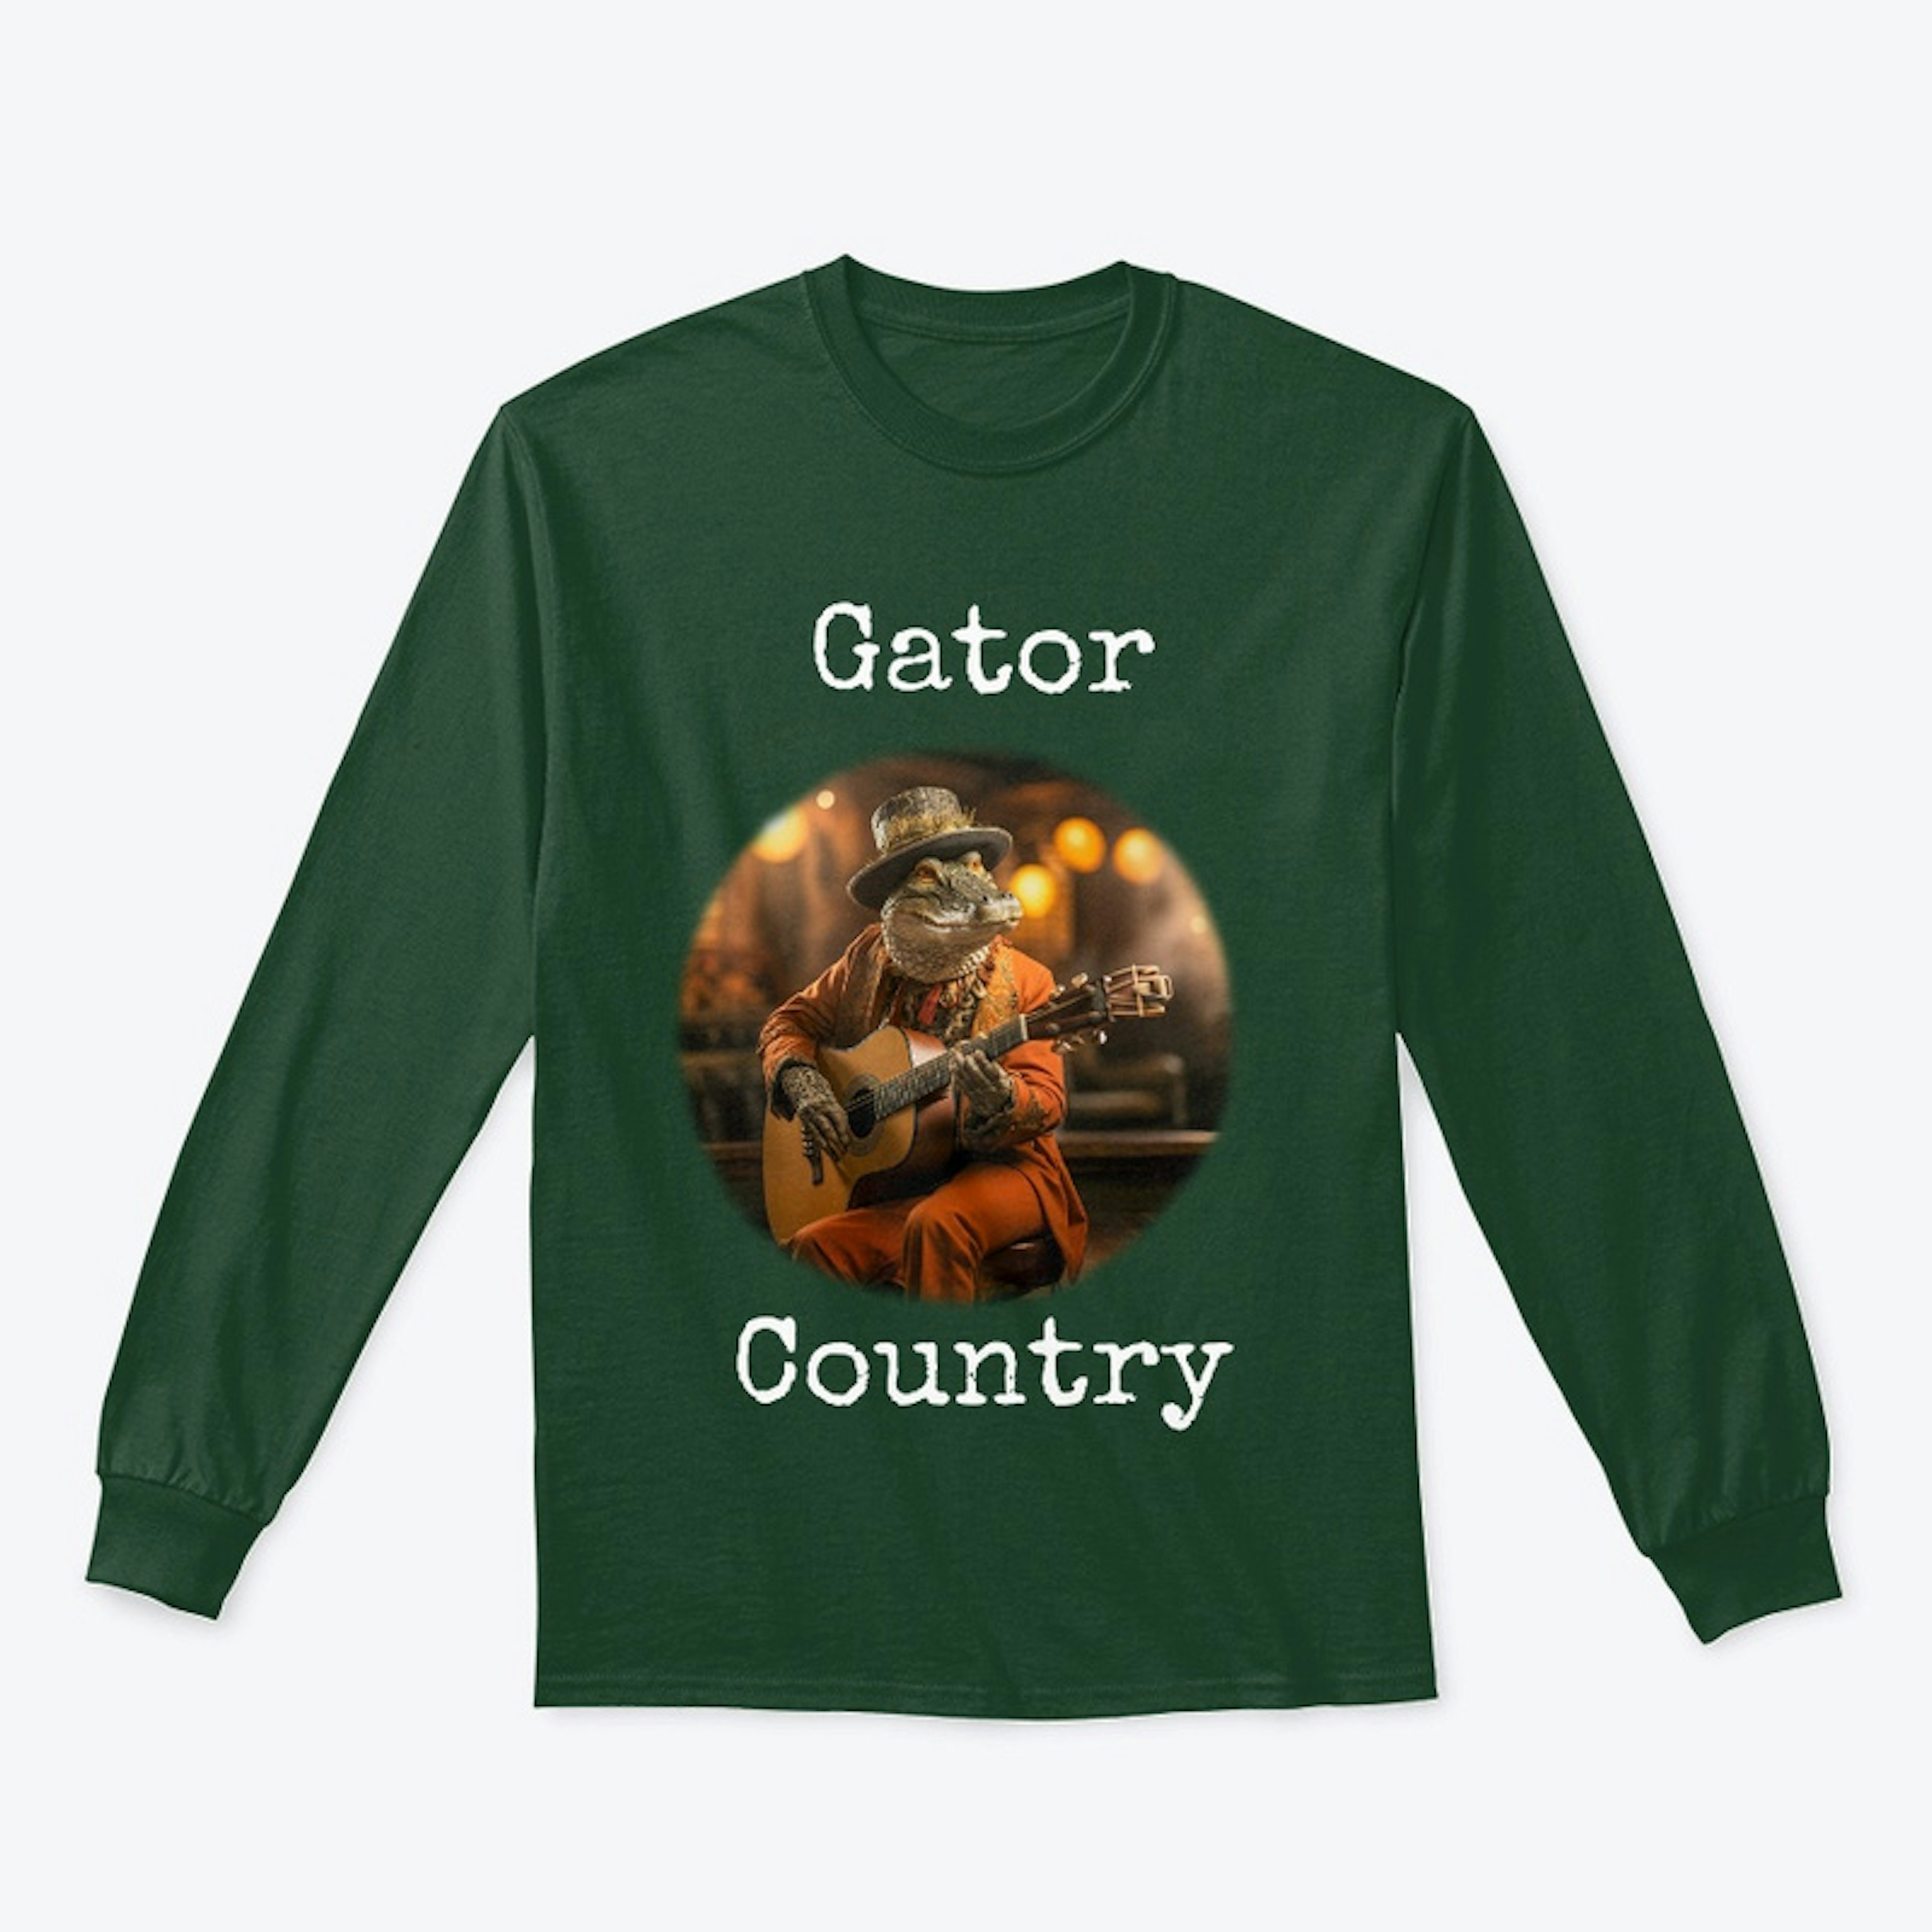 Florida is Gator Country